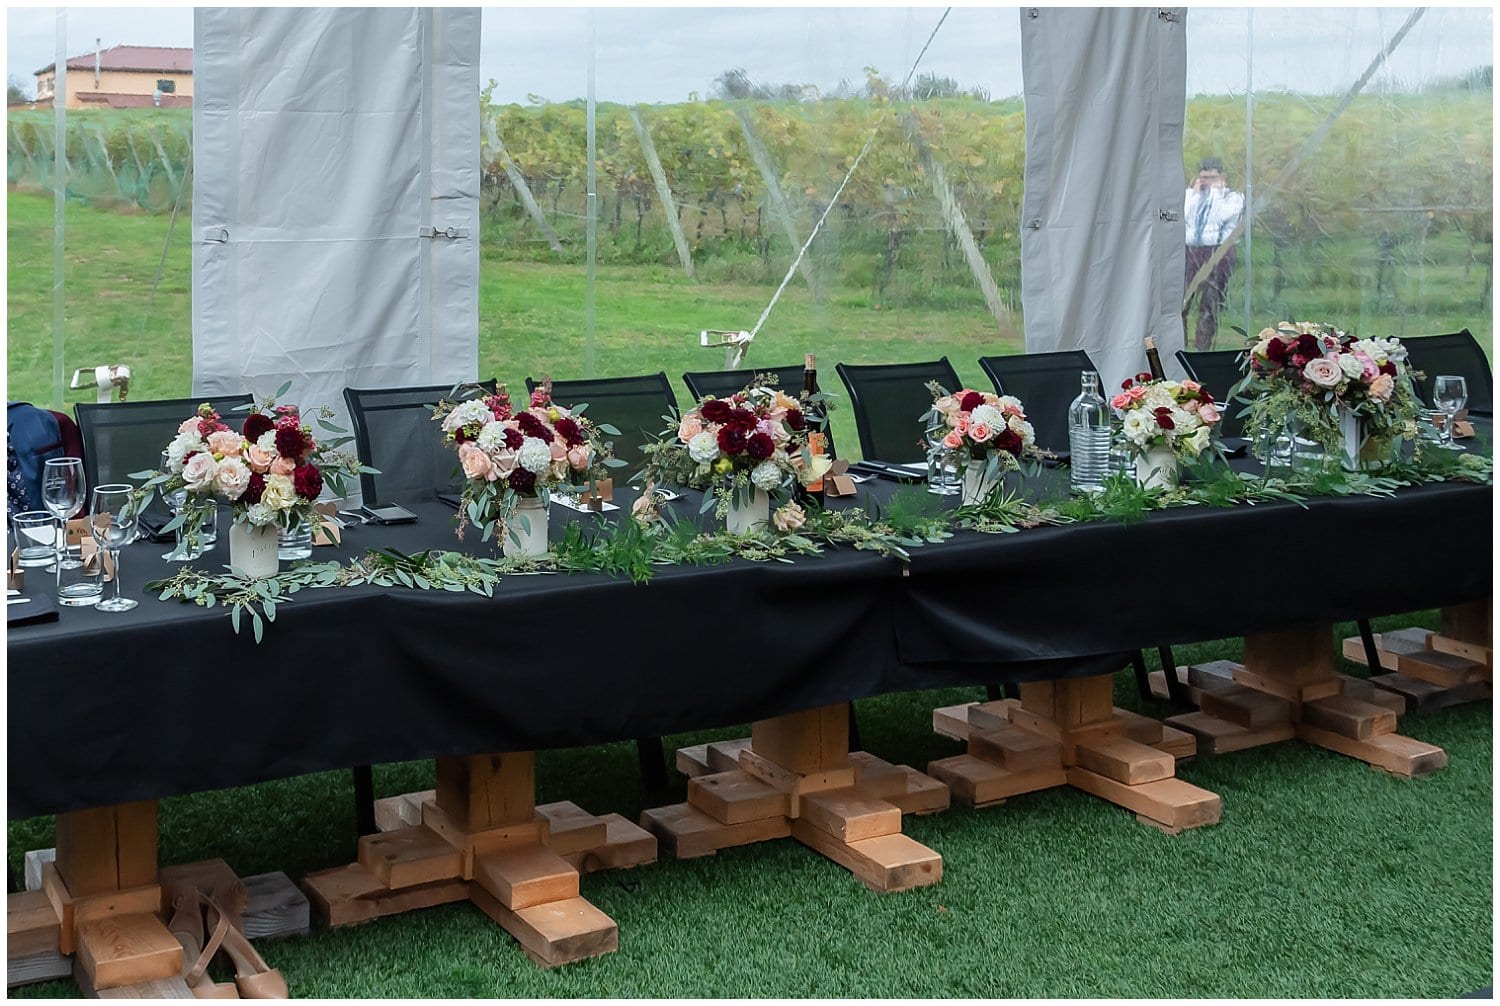 A rustic wooden head table for a wedding at Bent Ridge Winery in Nova Scotia adorned with bridal bouquets.